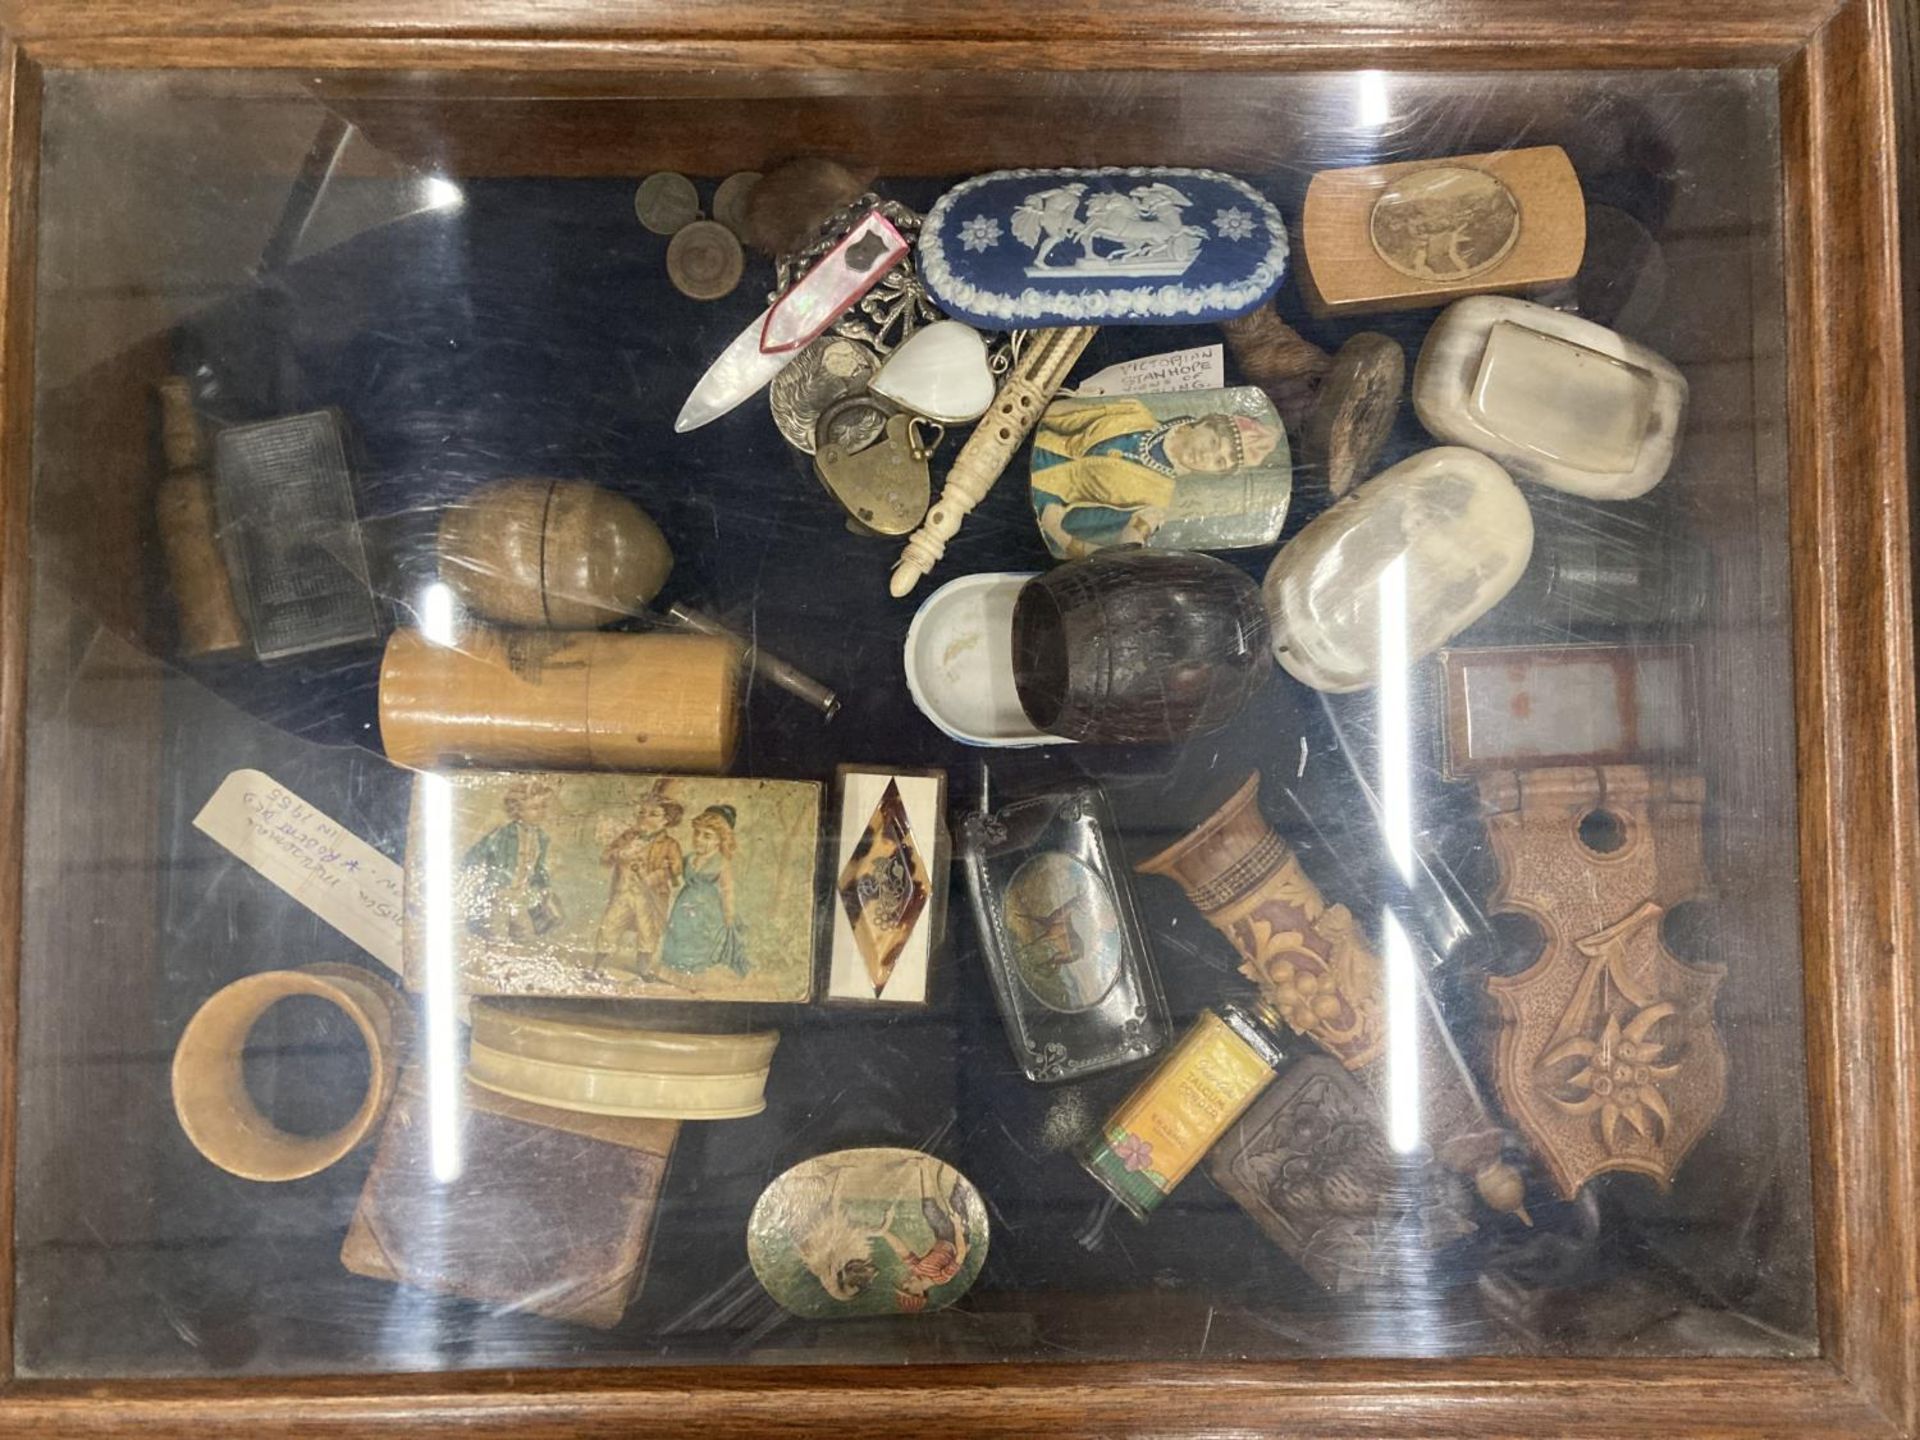 A DISPLAY CASE CONTAINING A QUANTITY OF COLLECTABLE ITEMS TO INCLUDE MAUCHLINE WARE, 1900 SILVER - Image 4 of 4